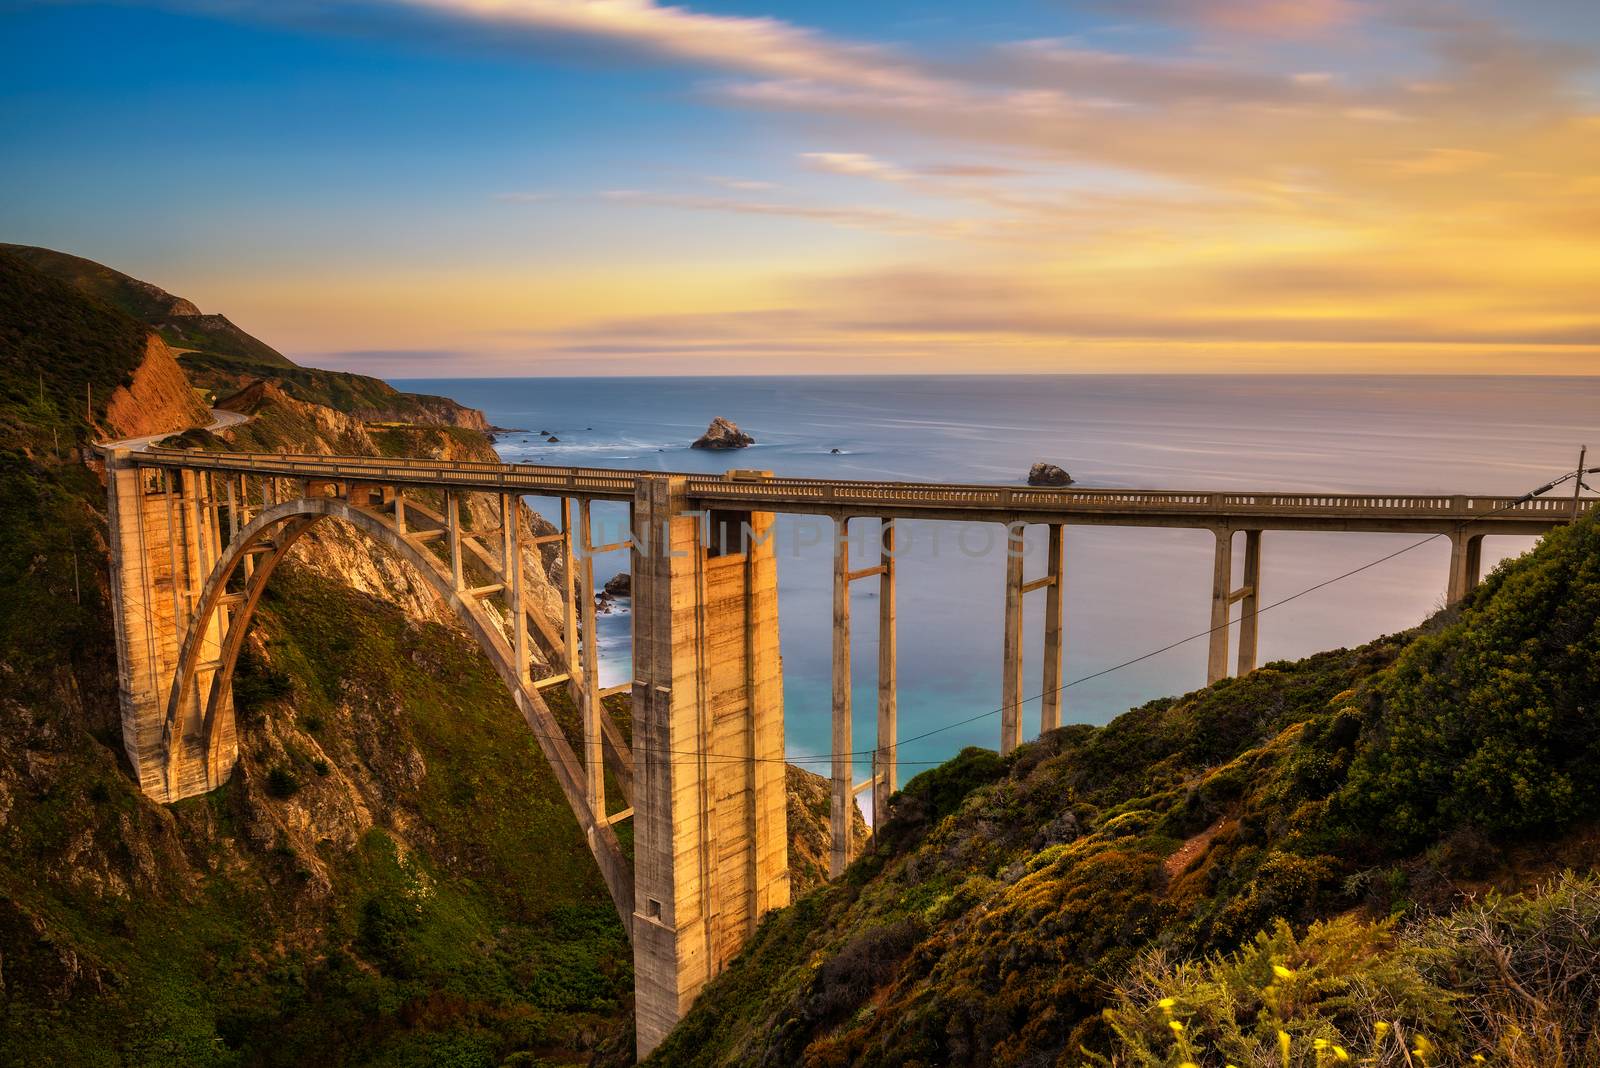 Bixby Bridge and Pacific Coast Highway at sunset by nickfox